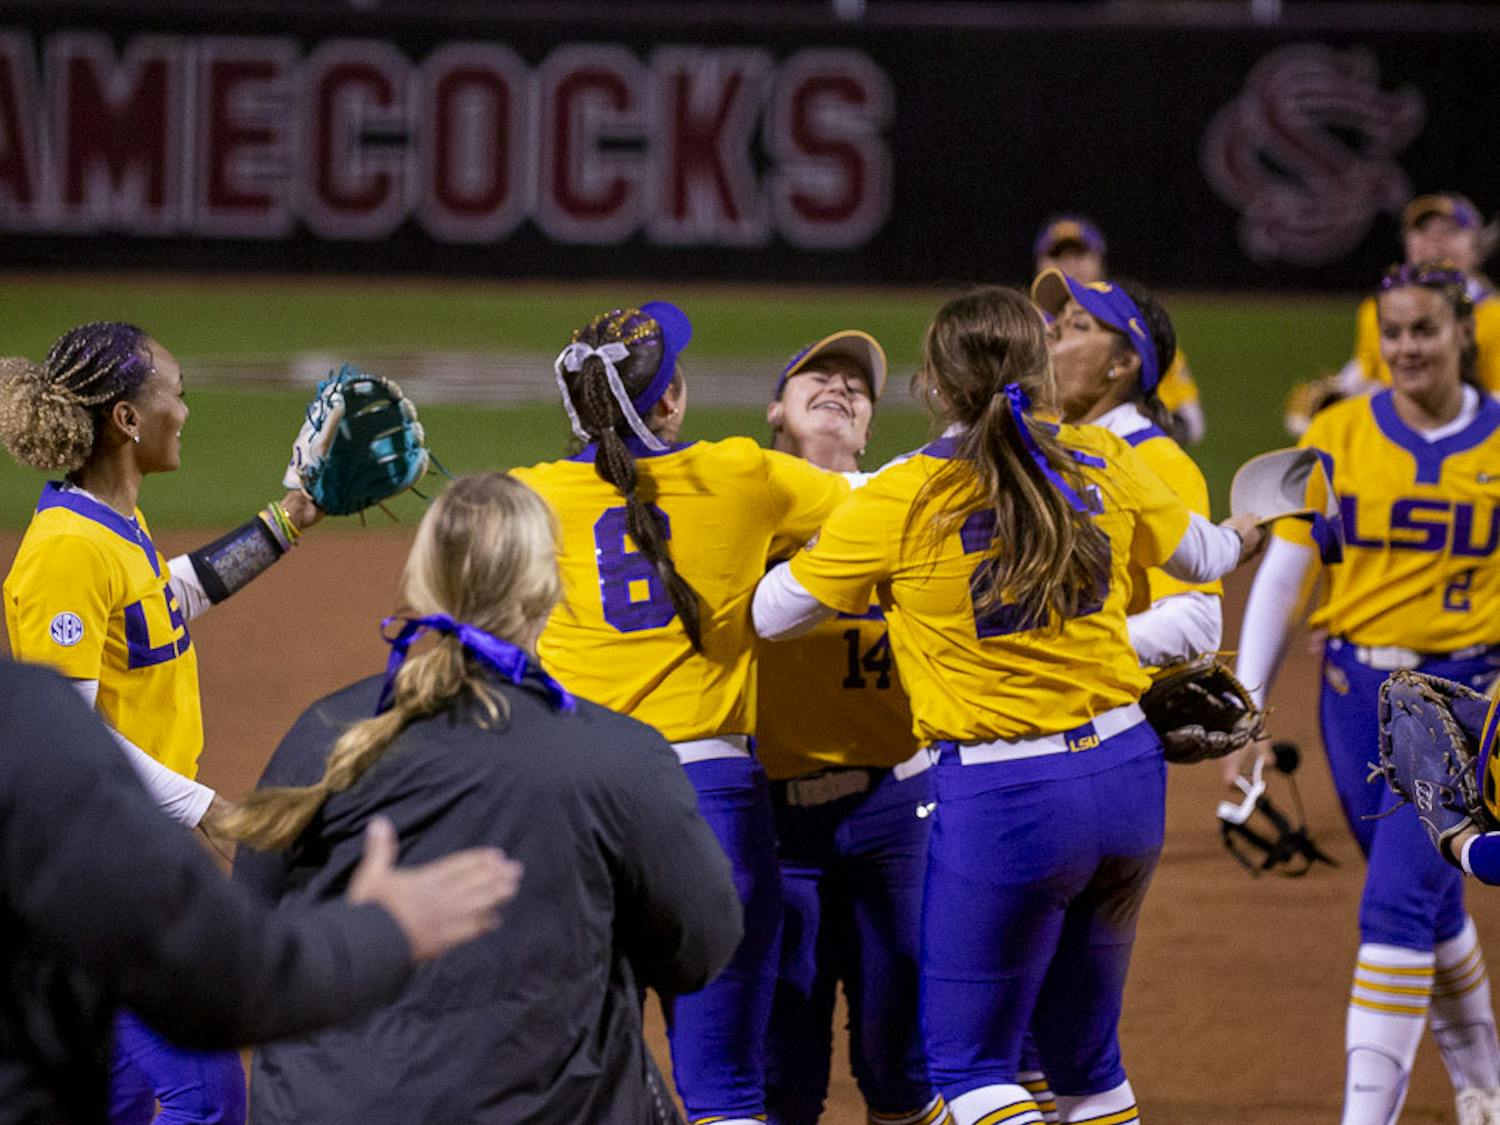 LSU celebrates after junior infielder Karli Petty makes a double play against South Carolina's offense during the second match of the doubleheader at Beckham Field on March 13, 2023. The Tigers beat the Gamecocks 5-1.